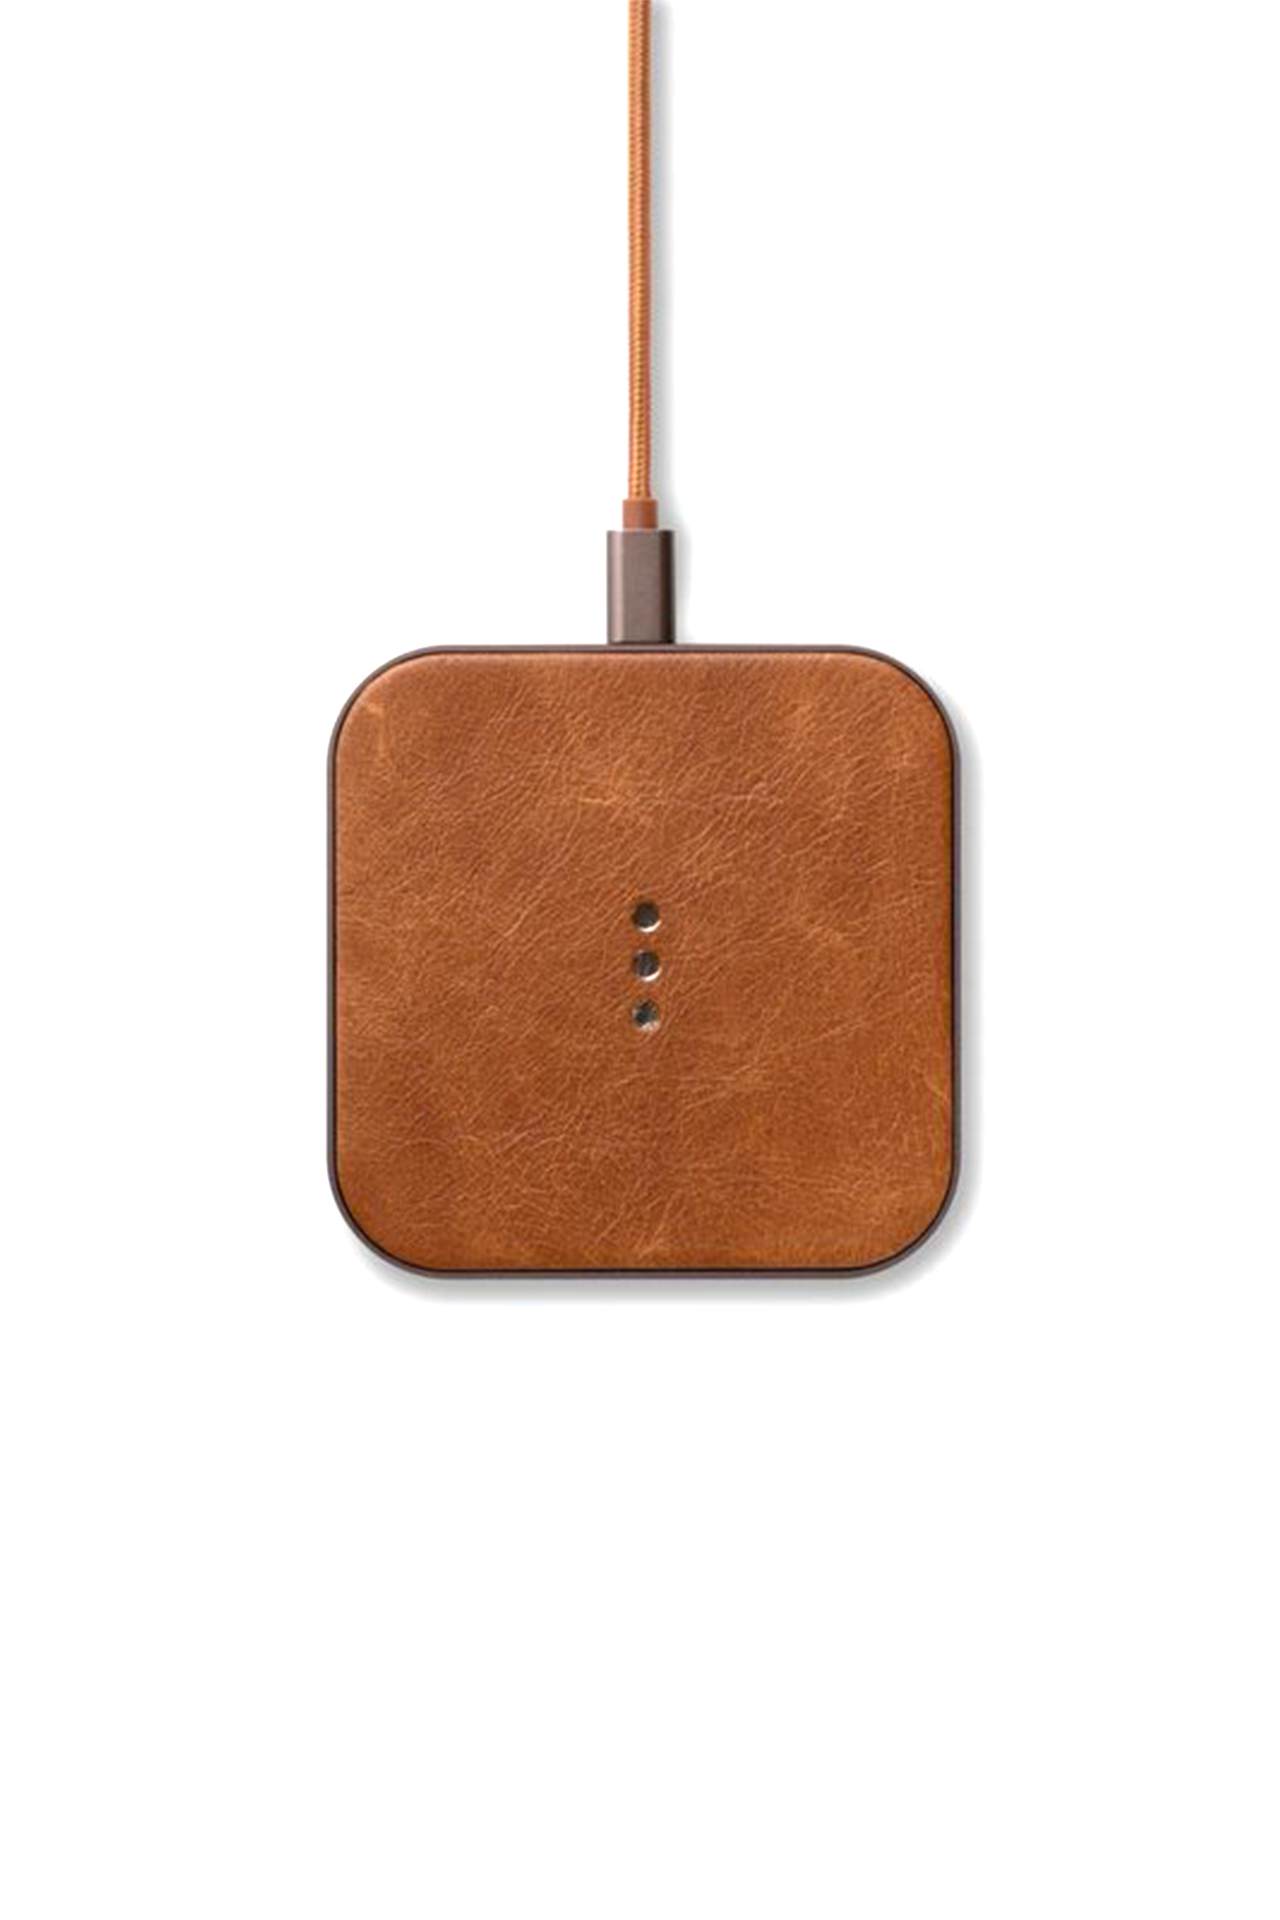 Courant CATCH:1 Wireless Charging Output Brown Front Image (6604412813427)